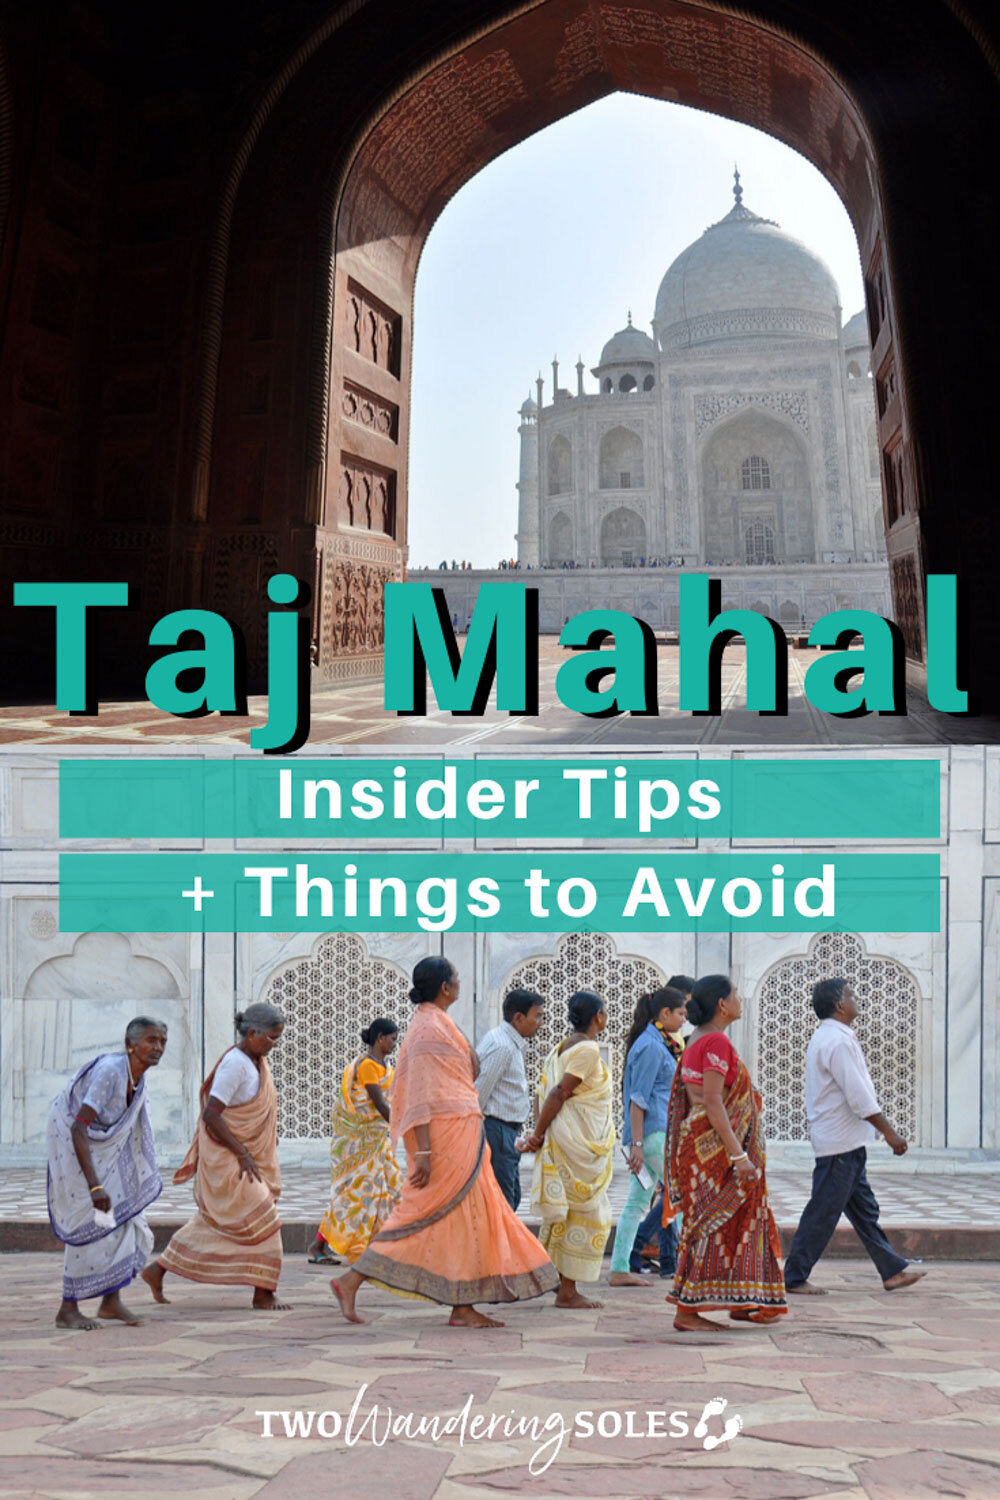 Ultimate Guide to the Taj Mahal and Things to Avoid